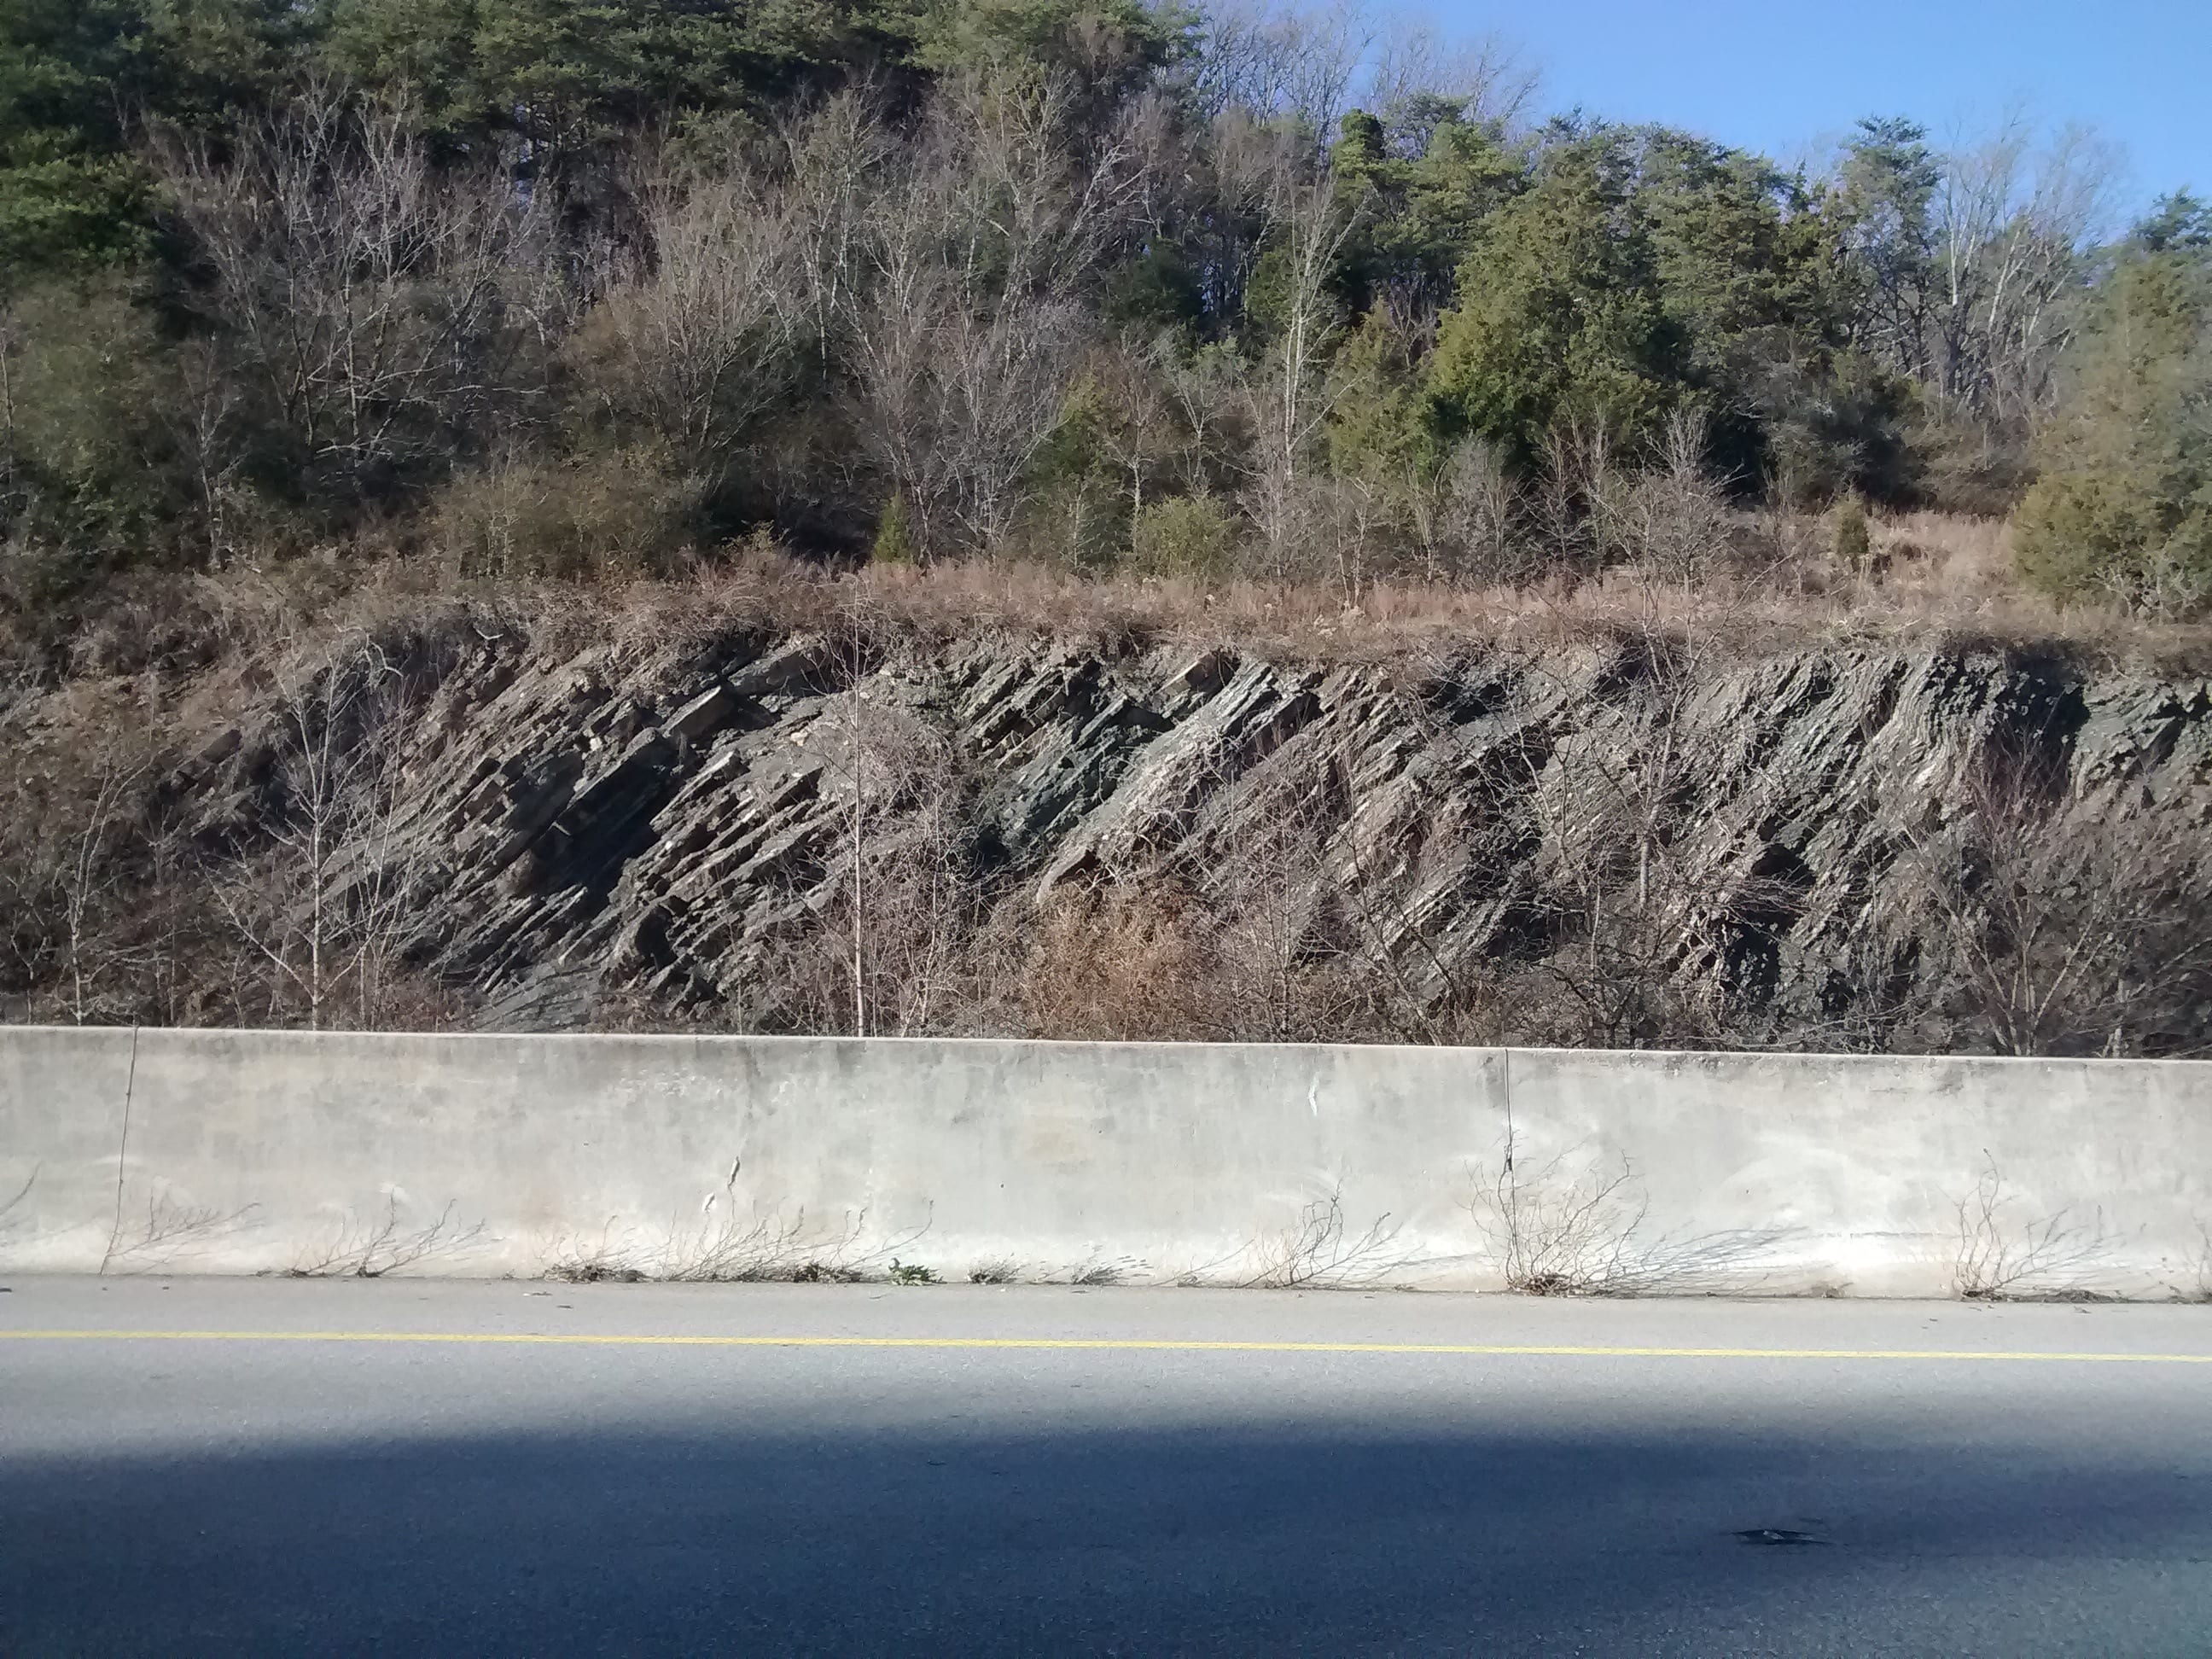 Road cut showing sedamentation layers uplifted into a close to vertical position.